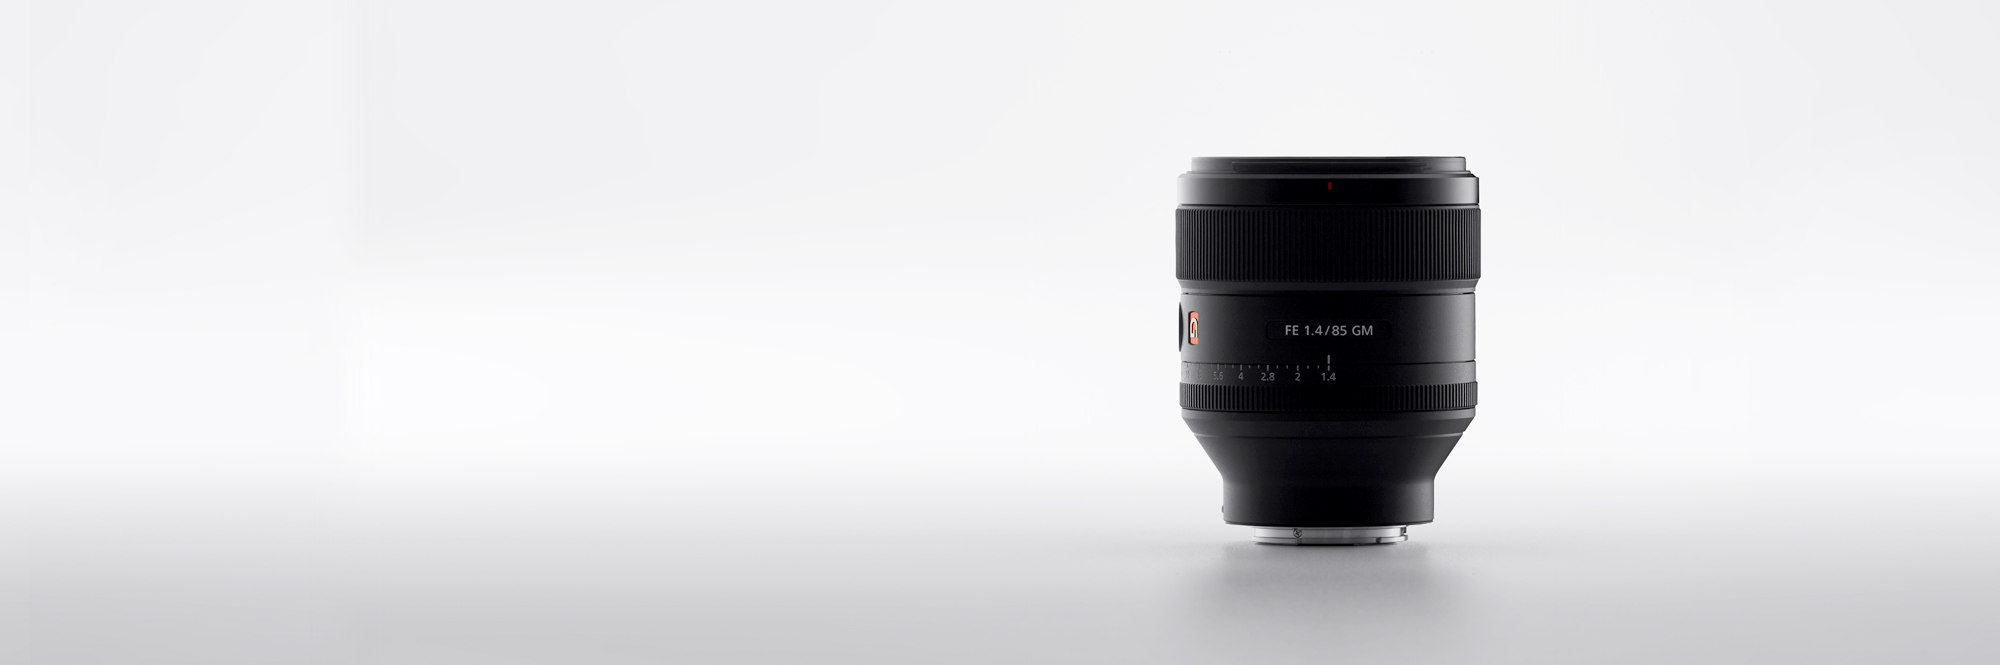 G MASTER FE 85mm F1.4 GM Commentary of Engineers - FE 85mm F1.4 GM 開発者インタビュー -